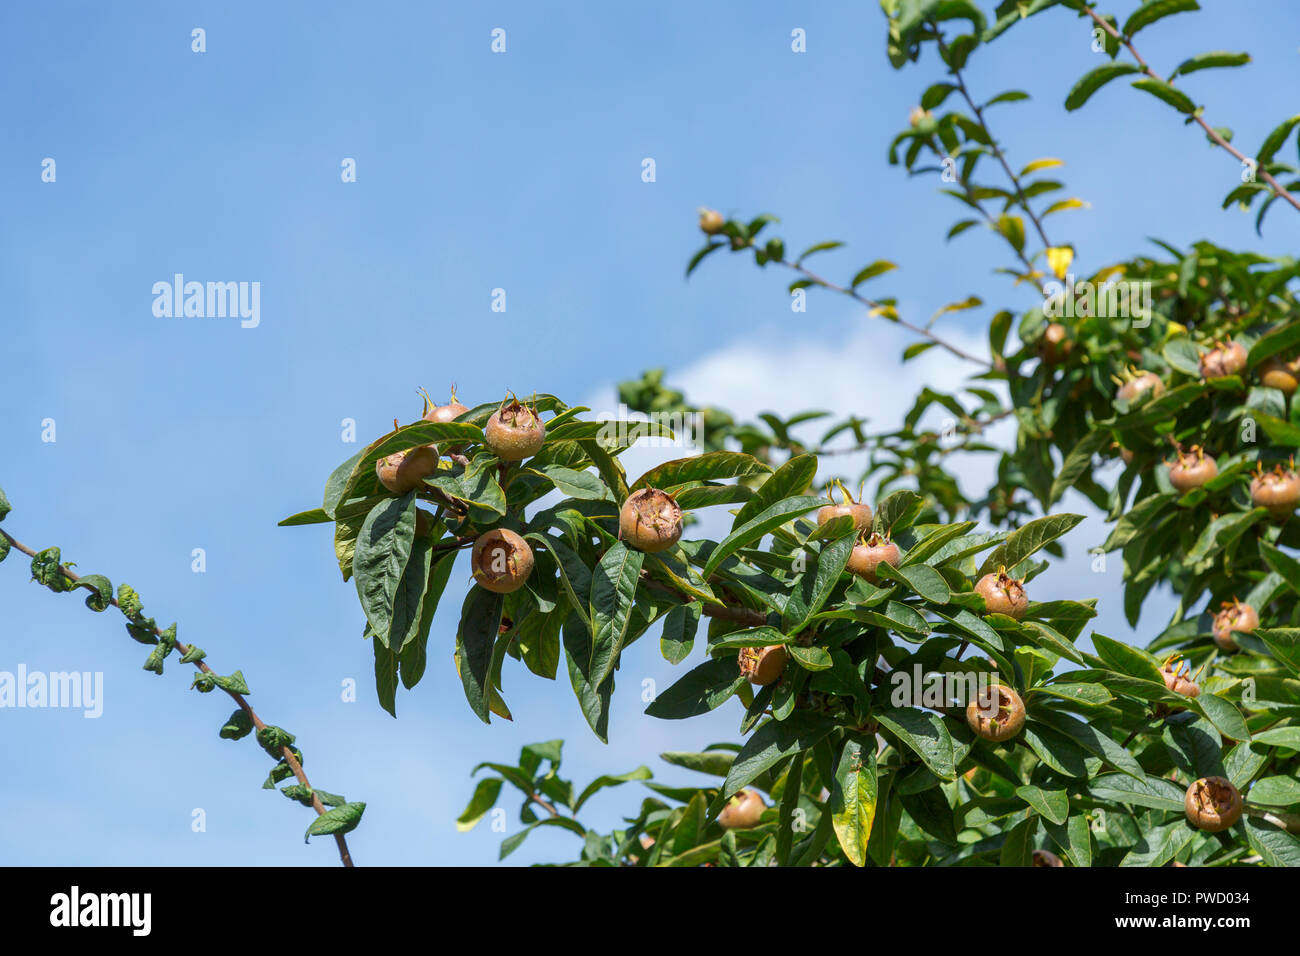 Foliage and fruit of edible Mespilus germanica, common medlar, growing in autumn against a blue sky, Norwich, Norfolk, East Anglia, eastern England Stock Photo